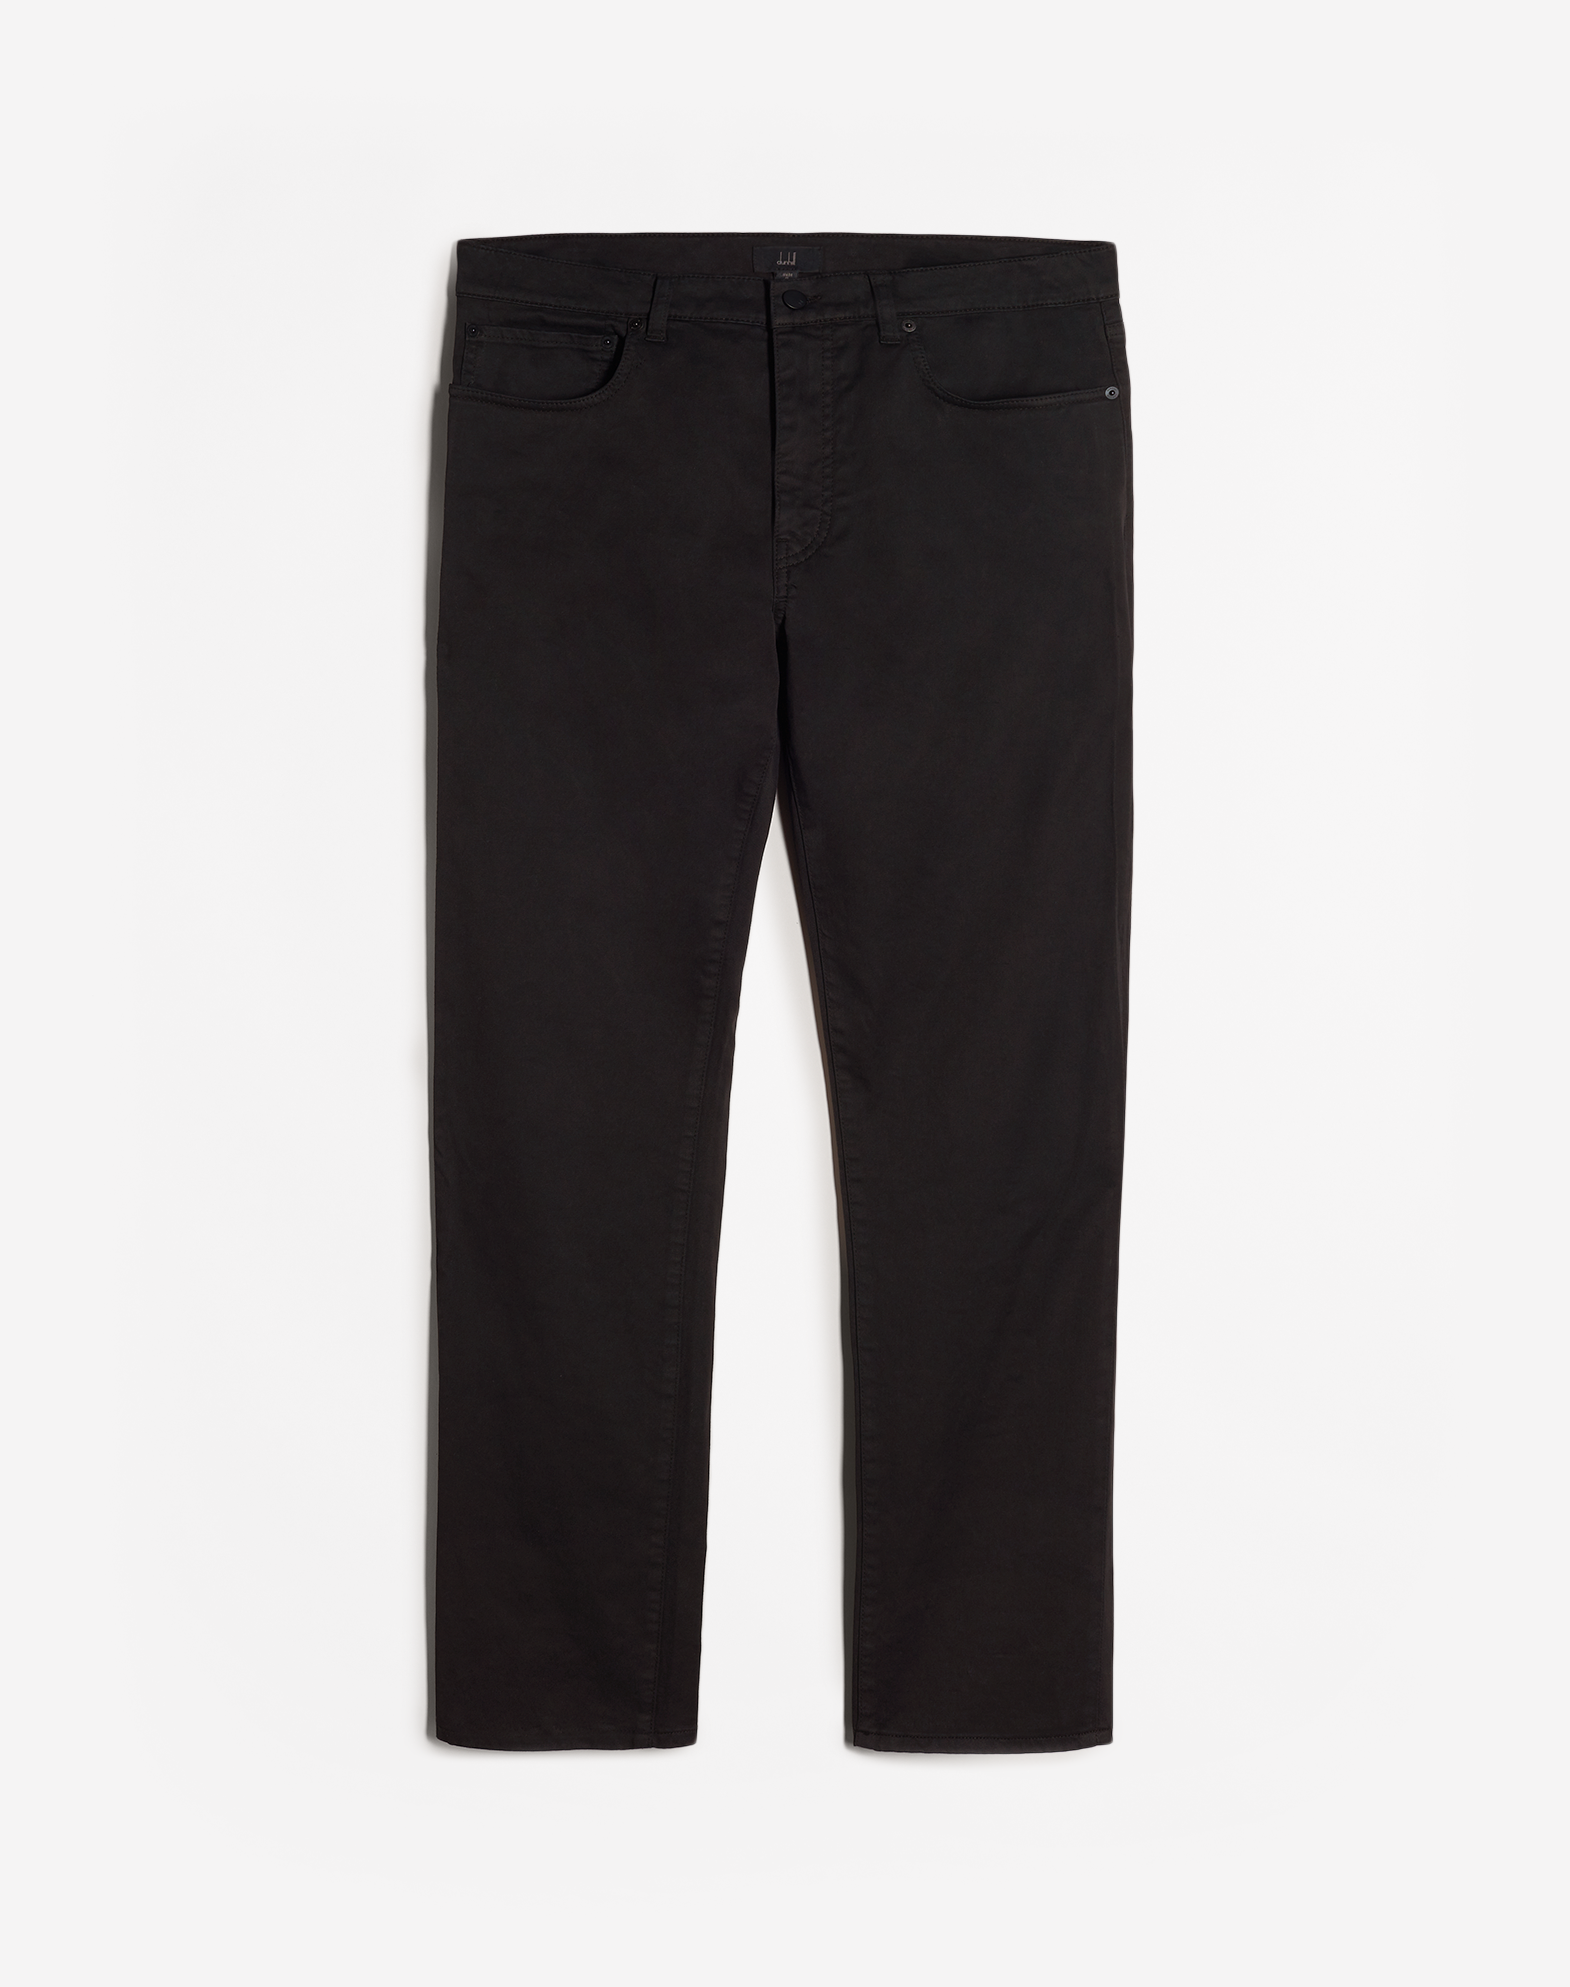 Dunhill Men's Chino